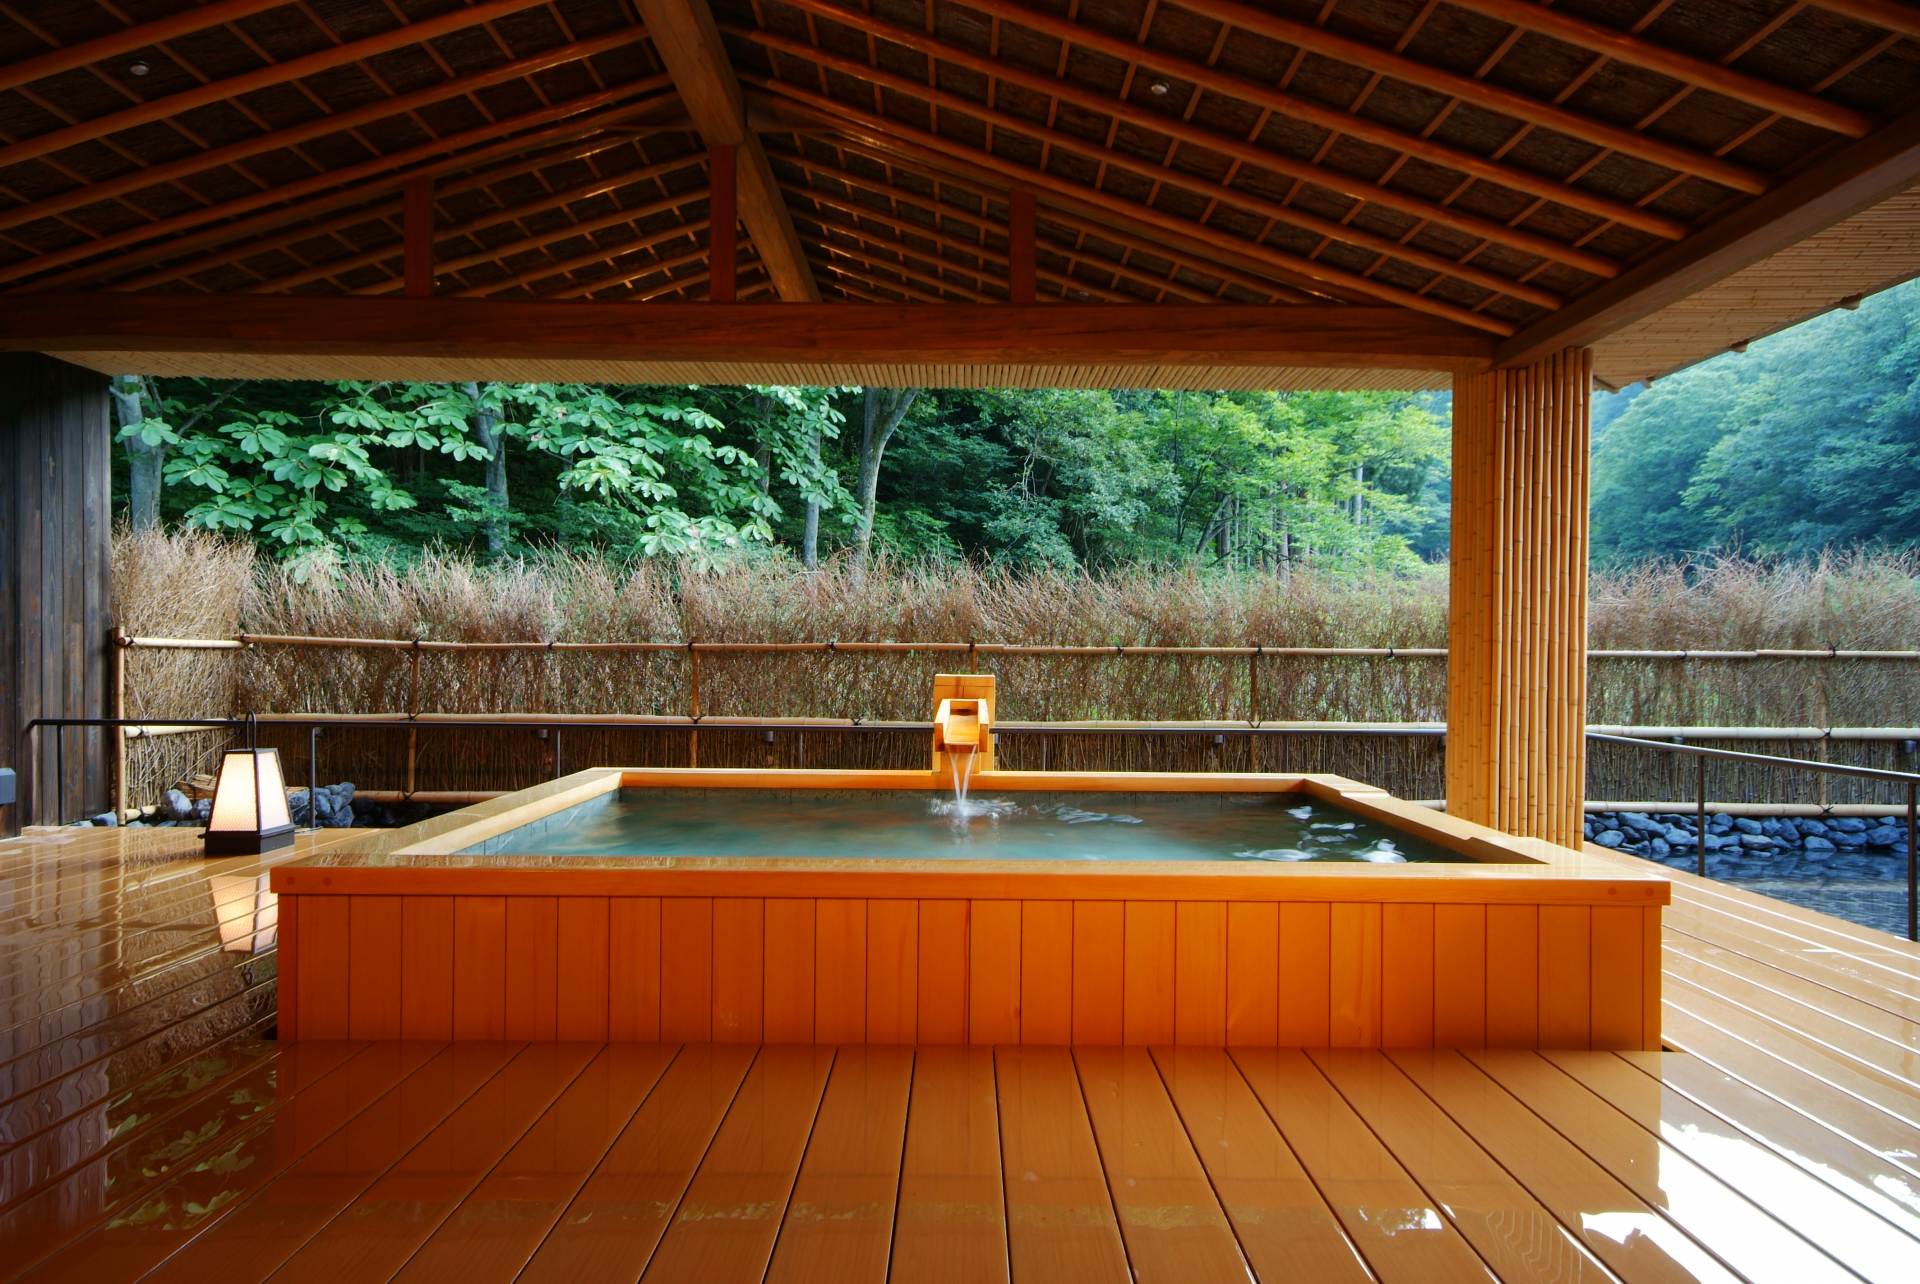 The rental private spa is popular. One room is 8,800 yen (including tax) for 70 min up to 4 guests.